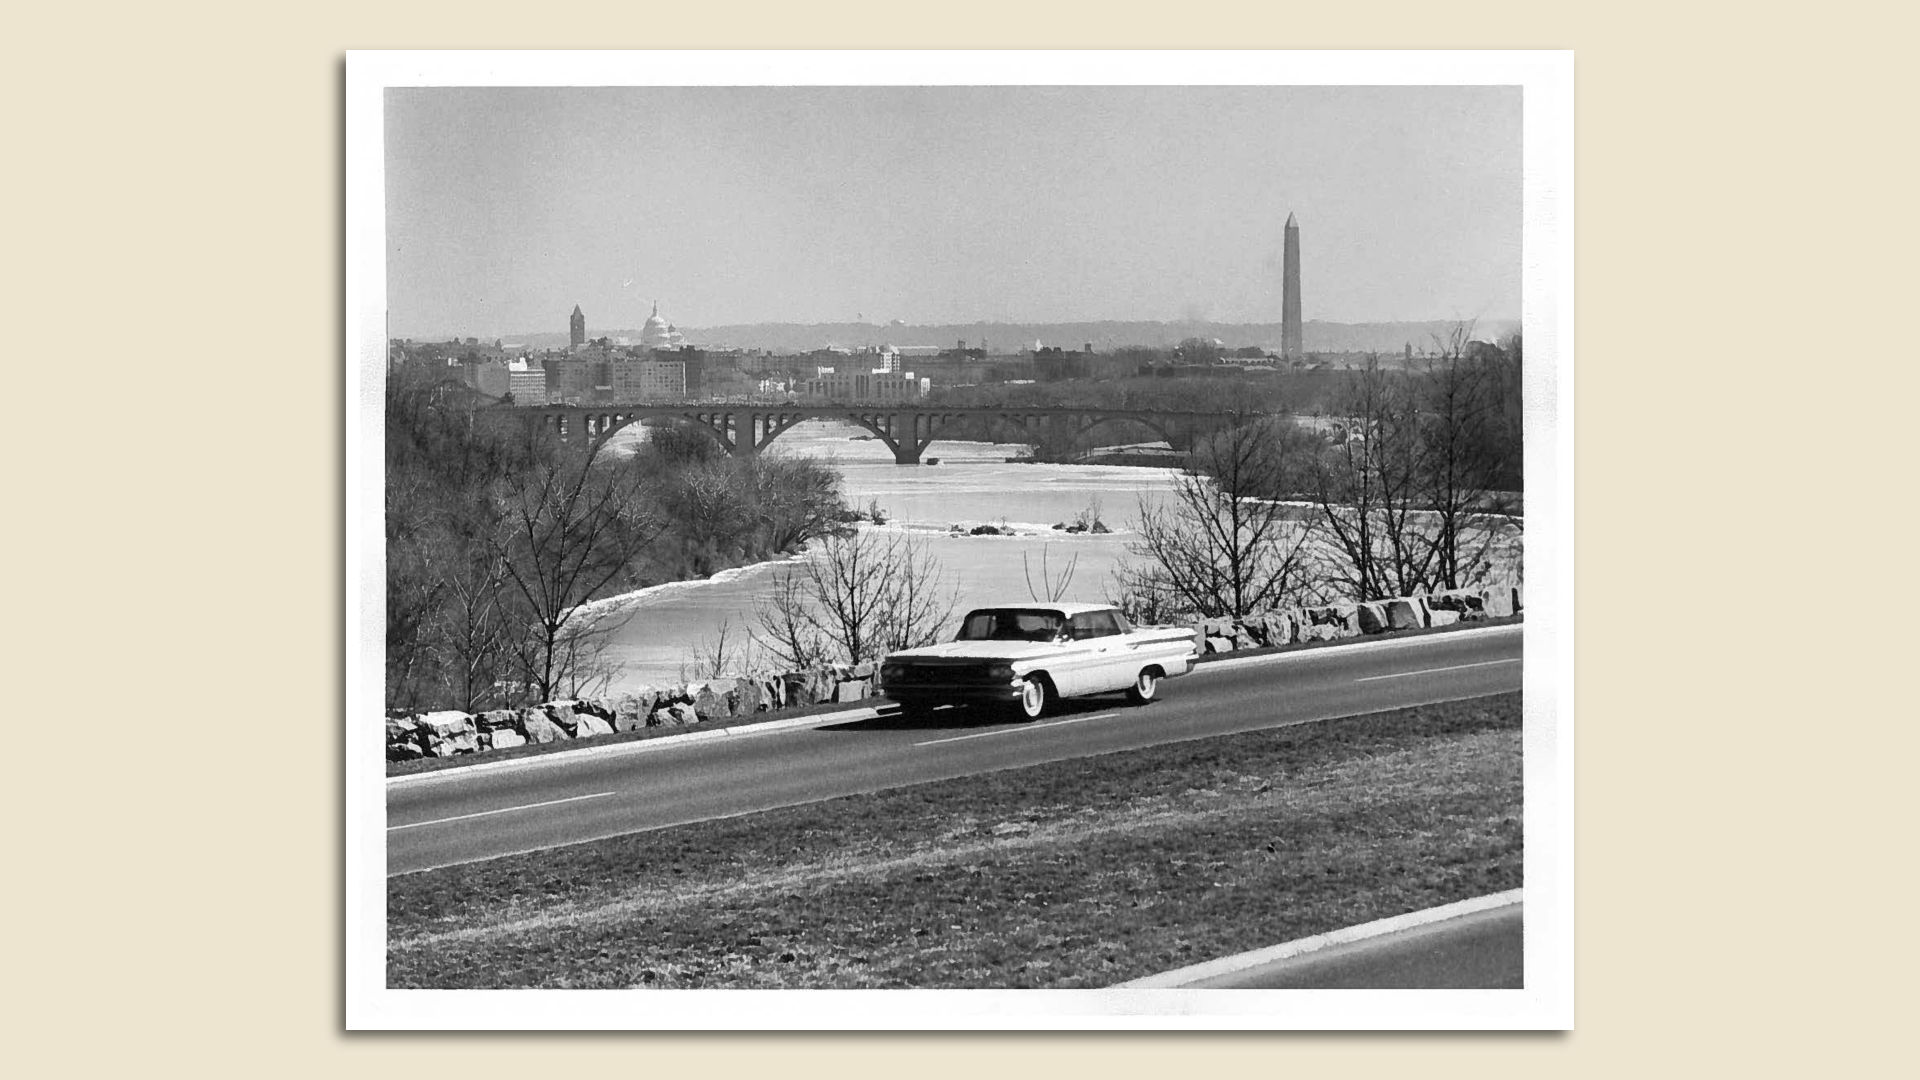 A 1959 view of the GW Parkway with Monument and Capitol dome visible